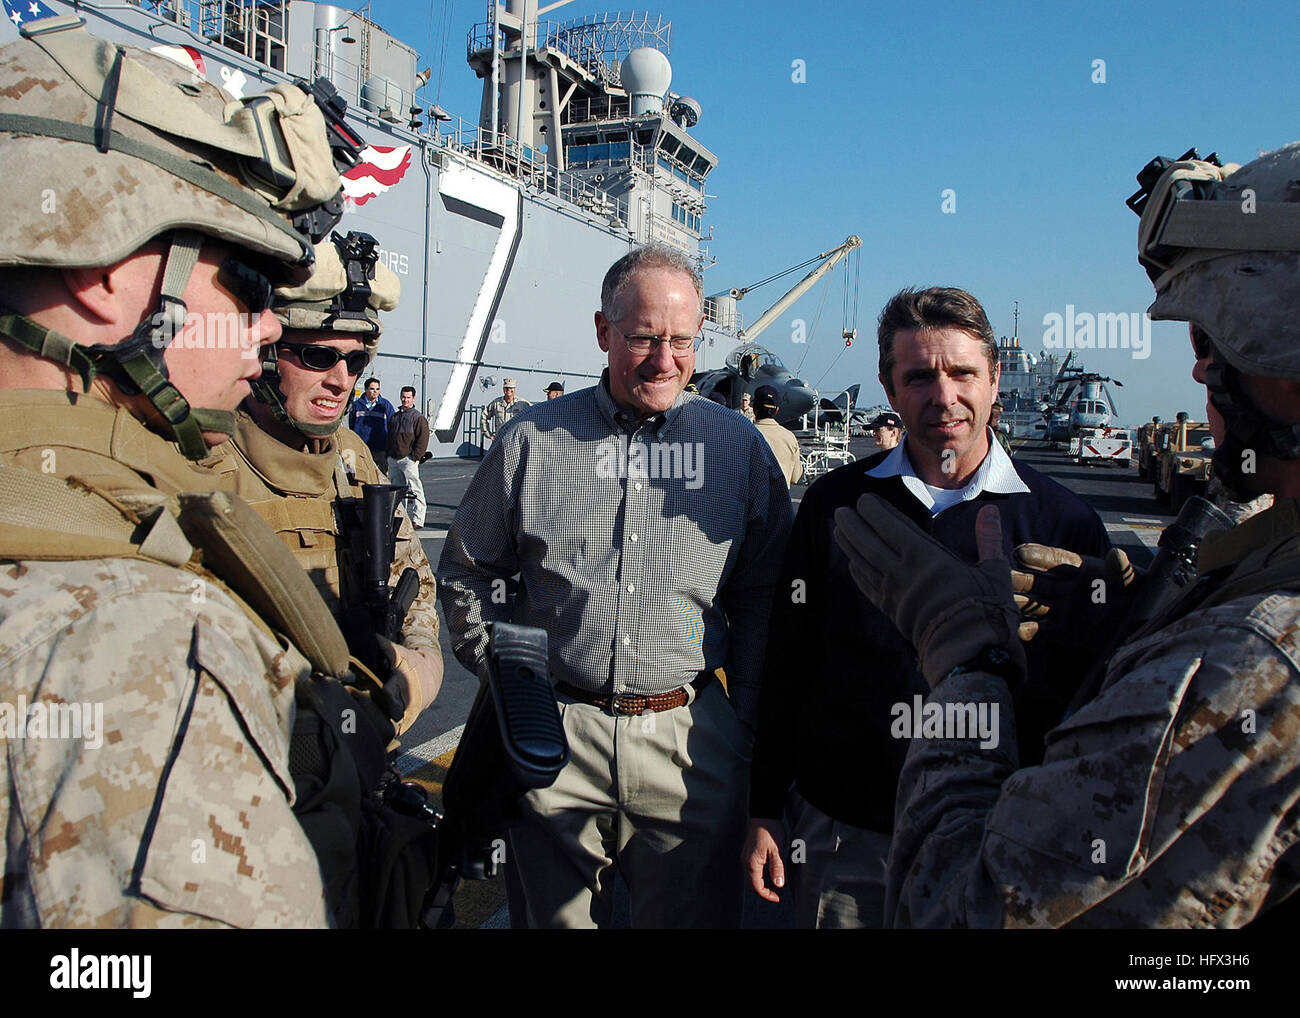 081219-N-5681S-066 BAHRAIN (Dec. 19, 2008) U.S. Reps. Mike Conaway, left, and Rob Whitman speak with Marines on the flight deck of the multi-purpose amphibious assault ship USS Iwo Jima (LHD 7). Iwo Jima is deployed the lead ship of the Iwo Jima Expeditionary Strike Group supporting maritime security operations in the U.S. 5th Fleet area of responsibility. (U.S. Navy photo by Mass Communication Specialist 2nd Class Michael Starkey/Released) US Navy 081219-N-5681S-066 U.S. Reps. Mike Conaway, left, and Rob Whitman speak with Marines on the flight deck of the multi-purpose amphibious assault shi Stock Photo